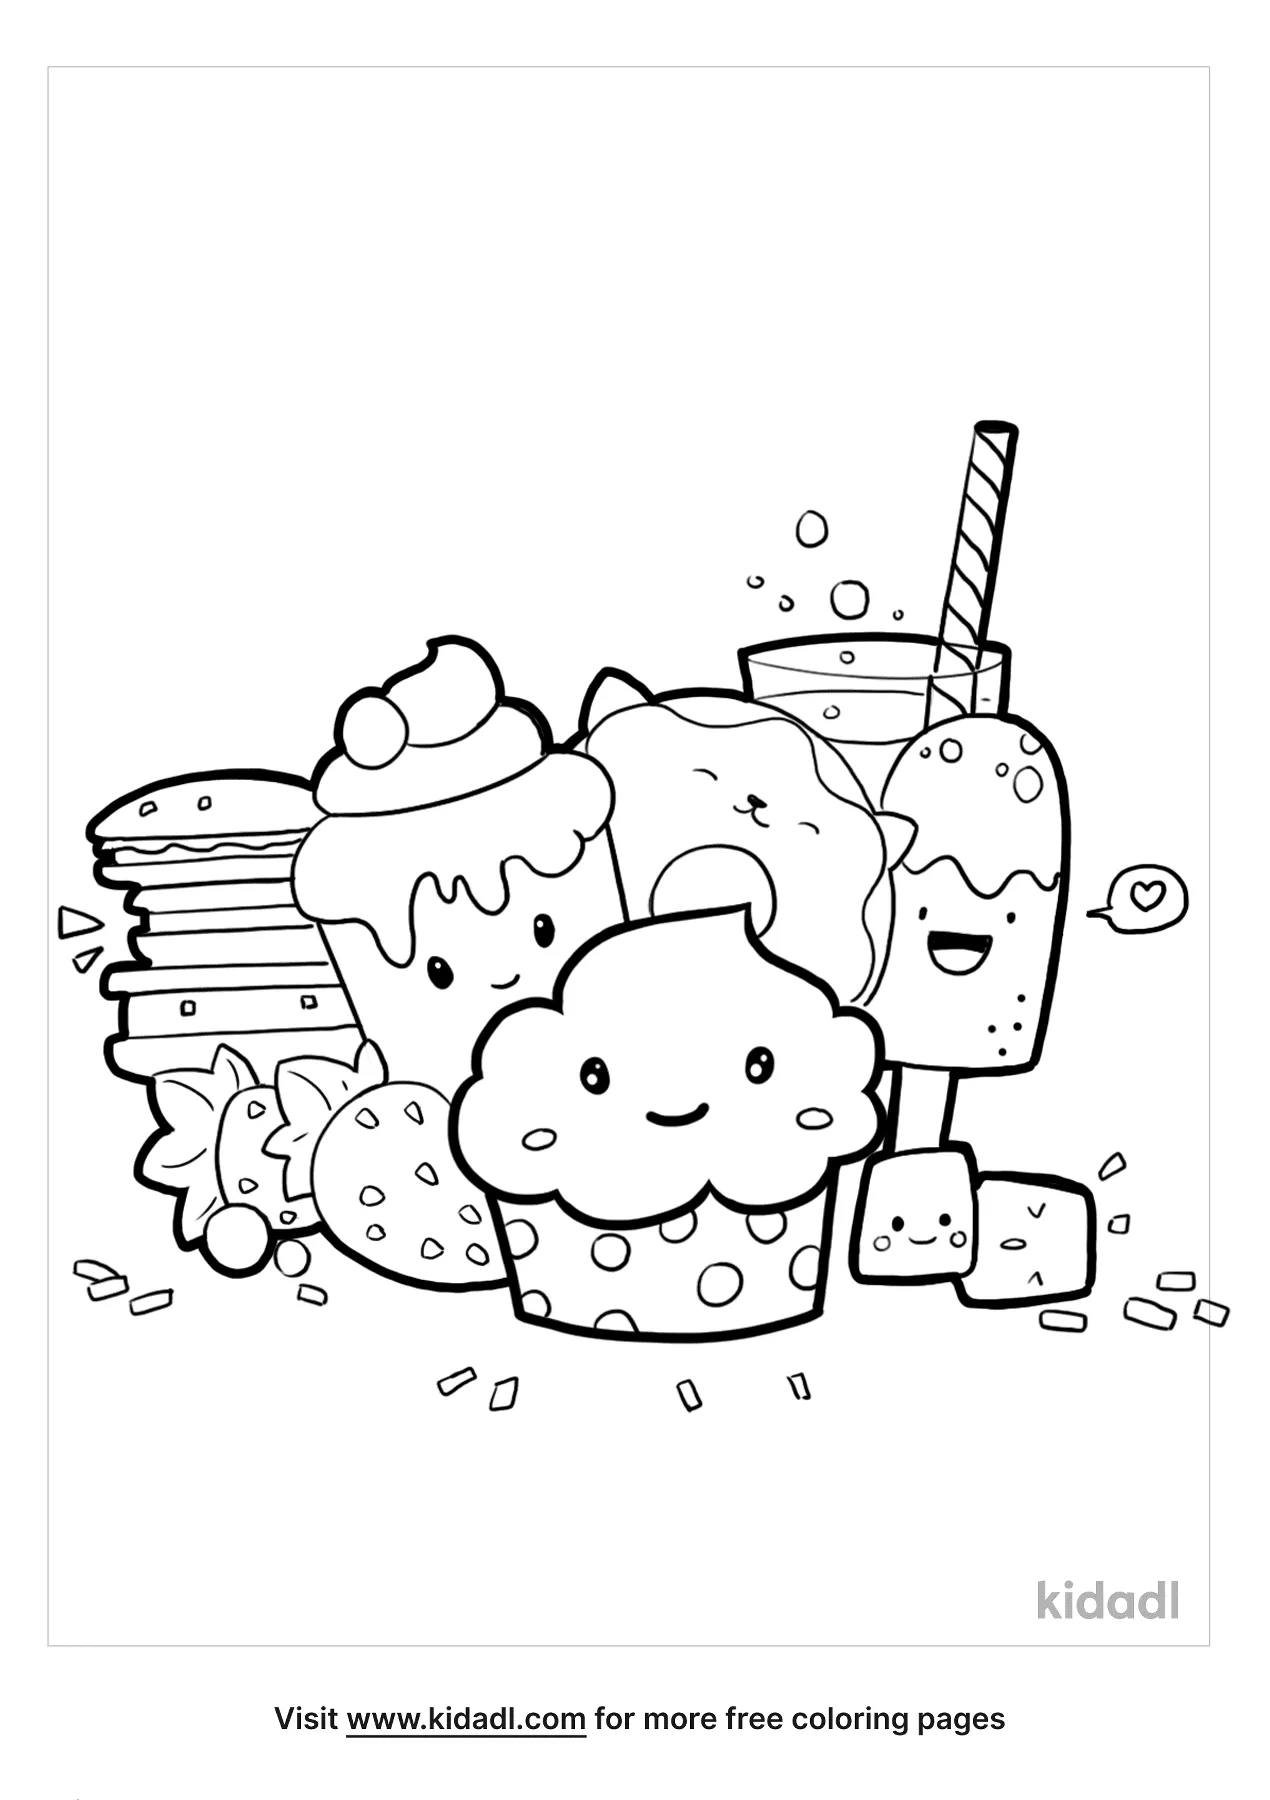 Kawaii Coloring Pages   Free Cartoons Coloring Pages   Kidadl